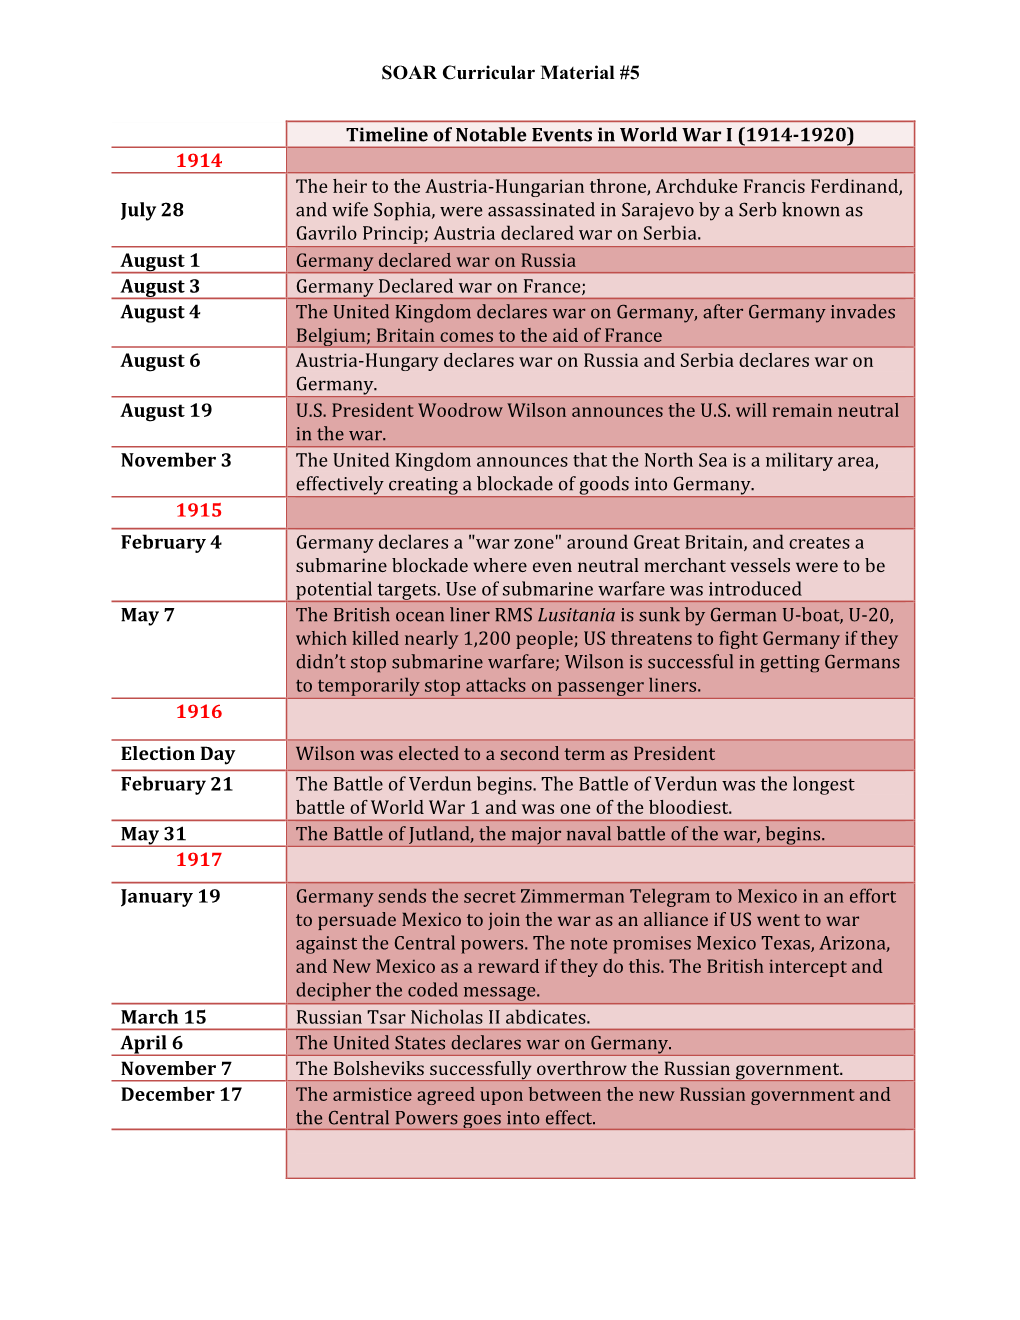 SOAR Curricular Material #5 Timeline of Notable Events in World War I